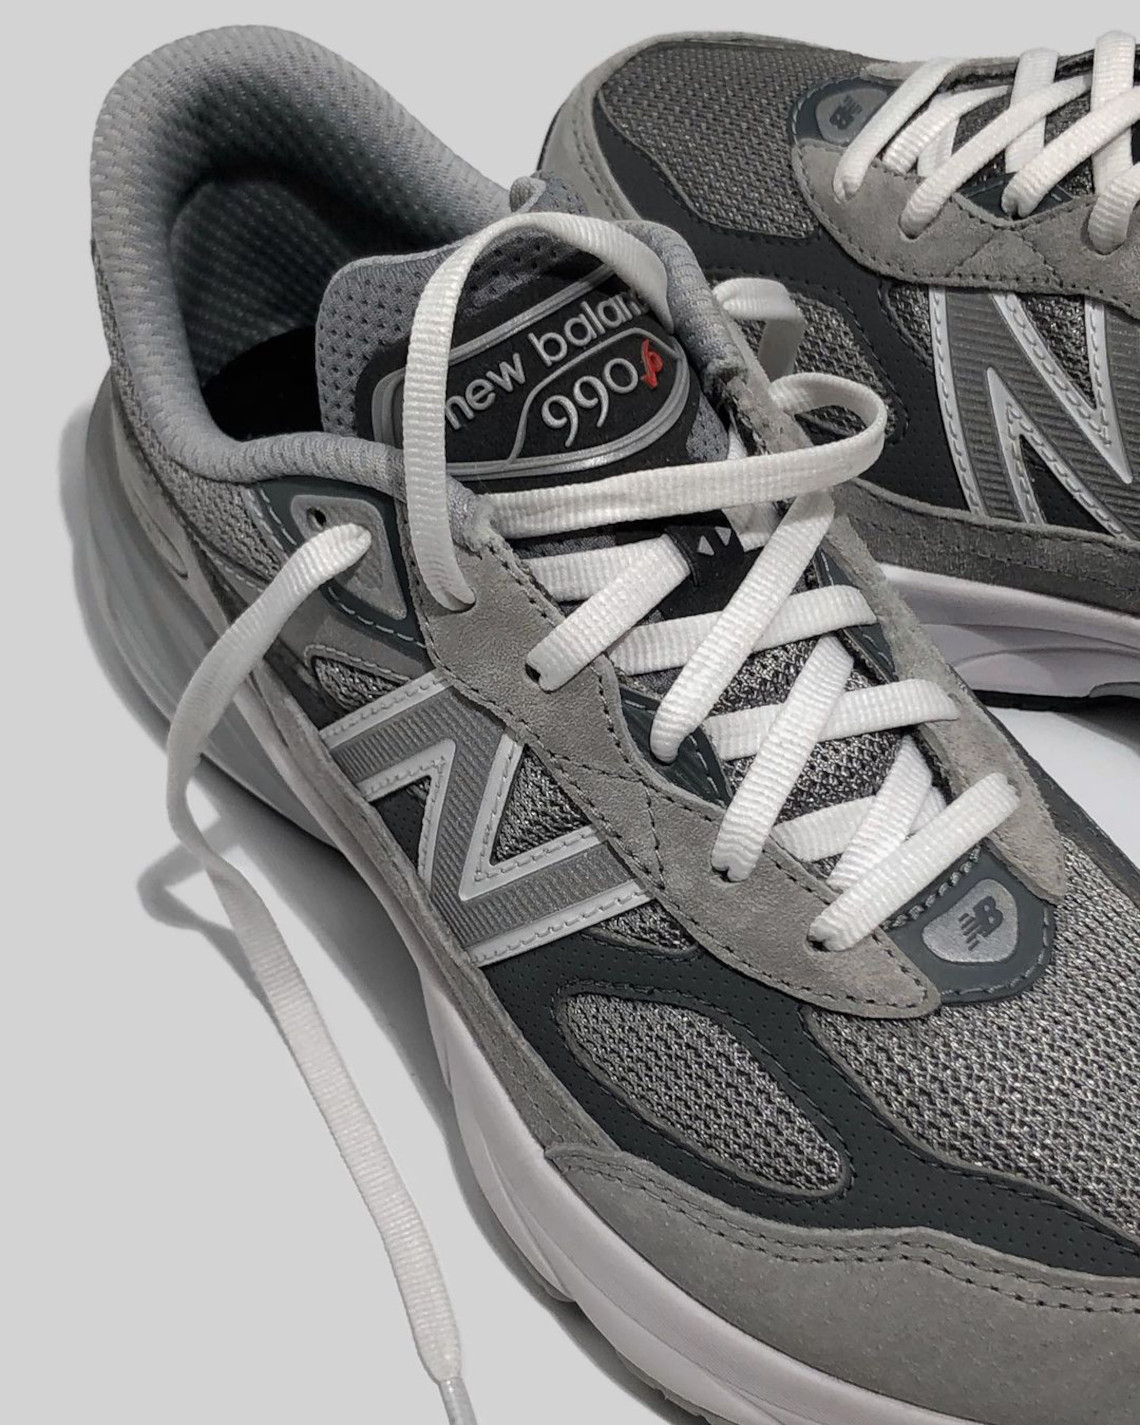 New Balance 990v6 Grey Release Date 5